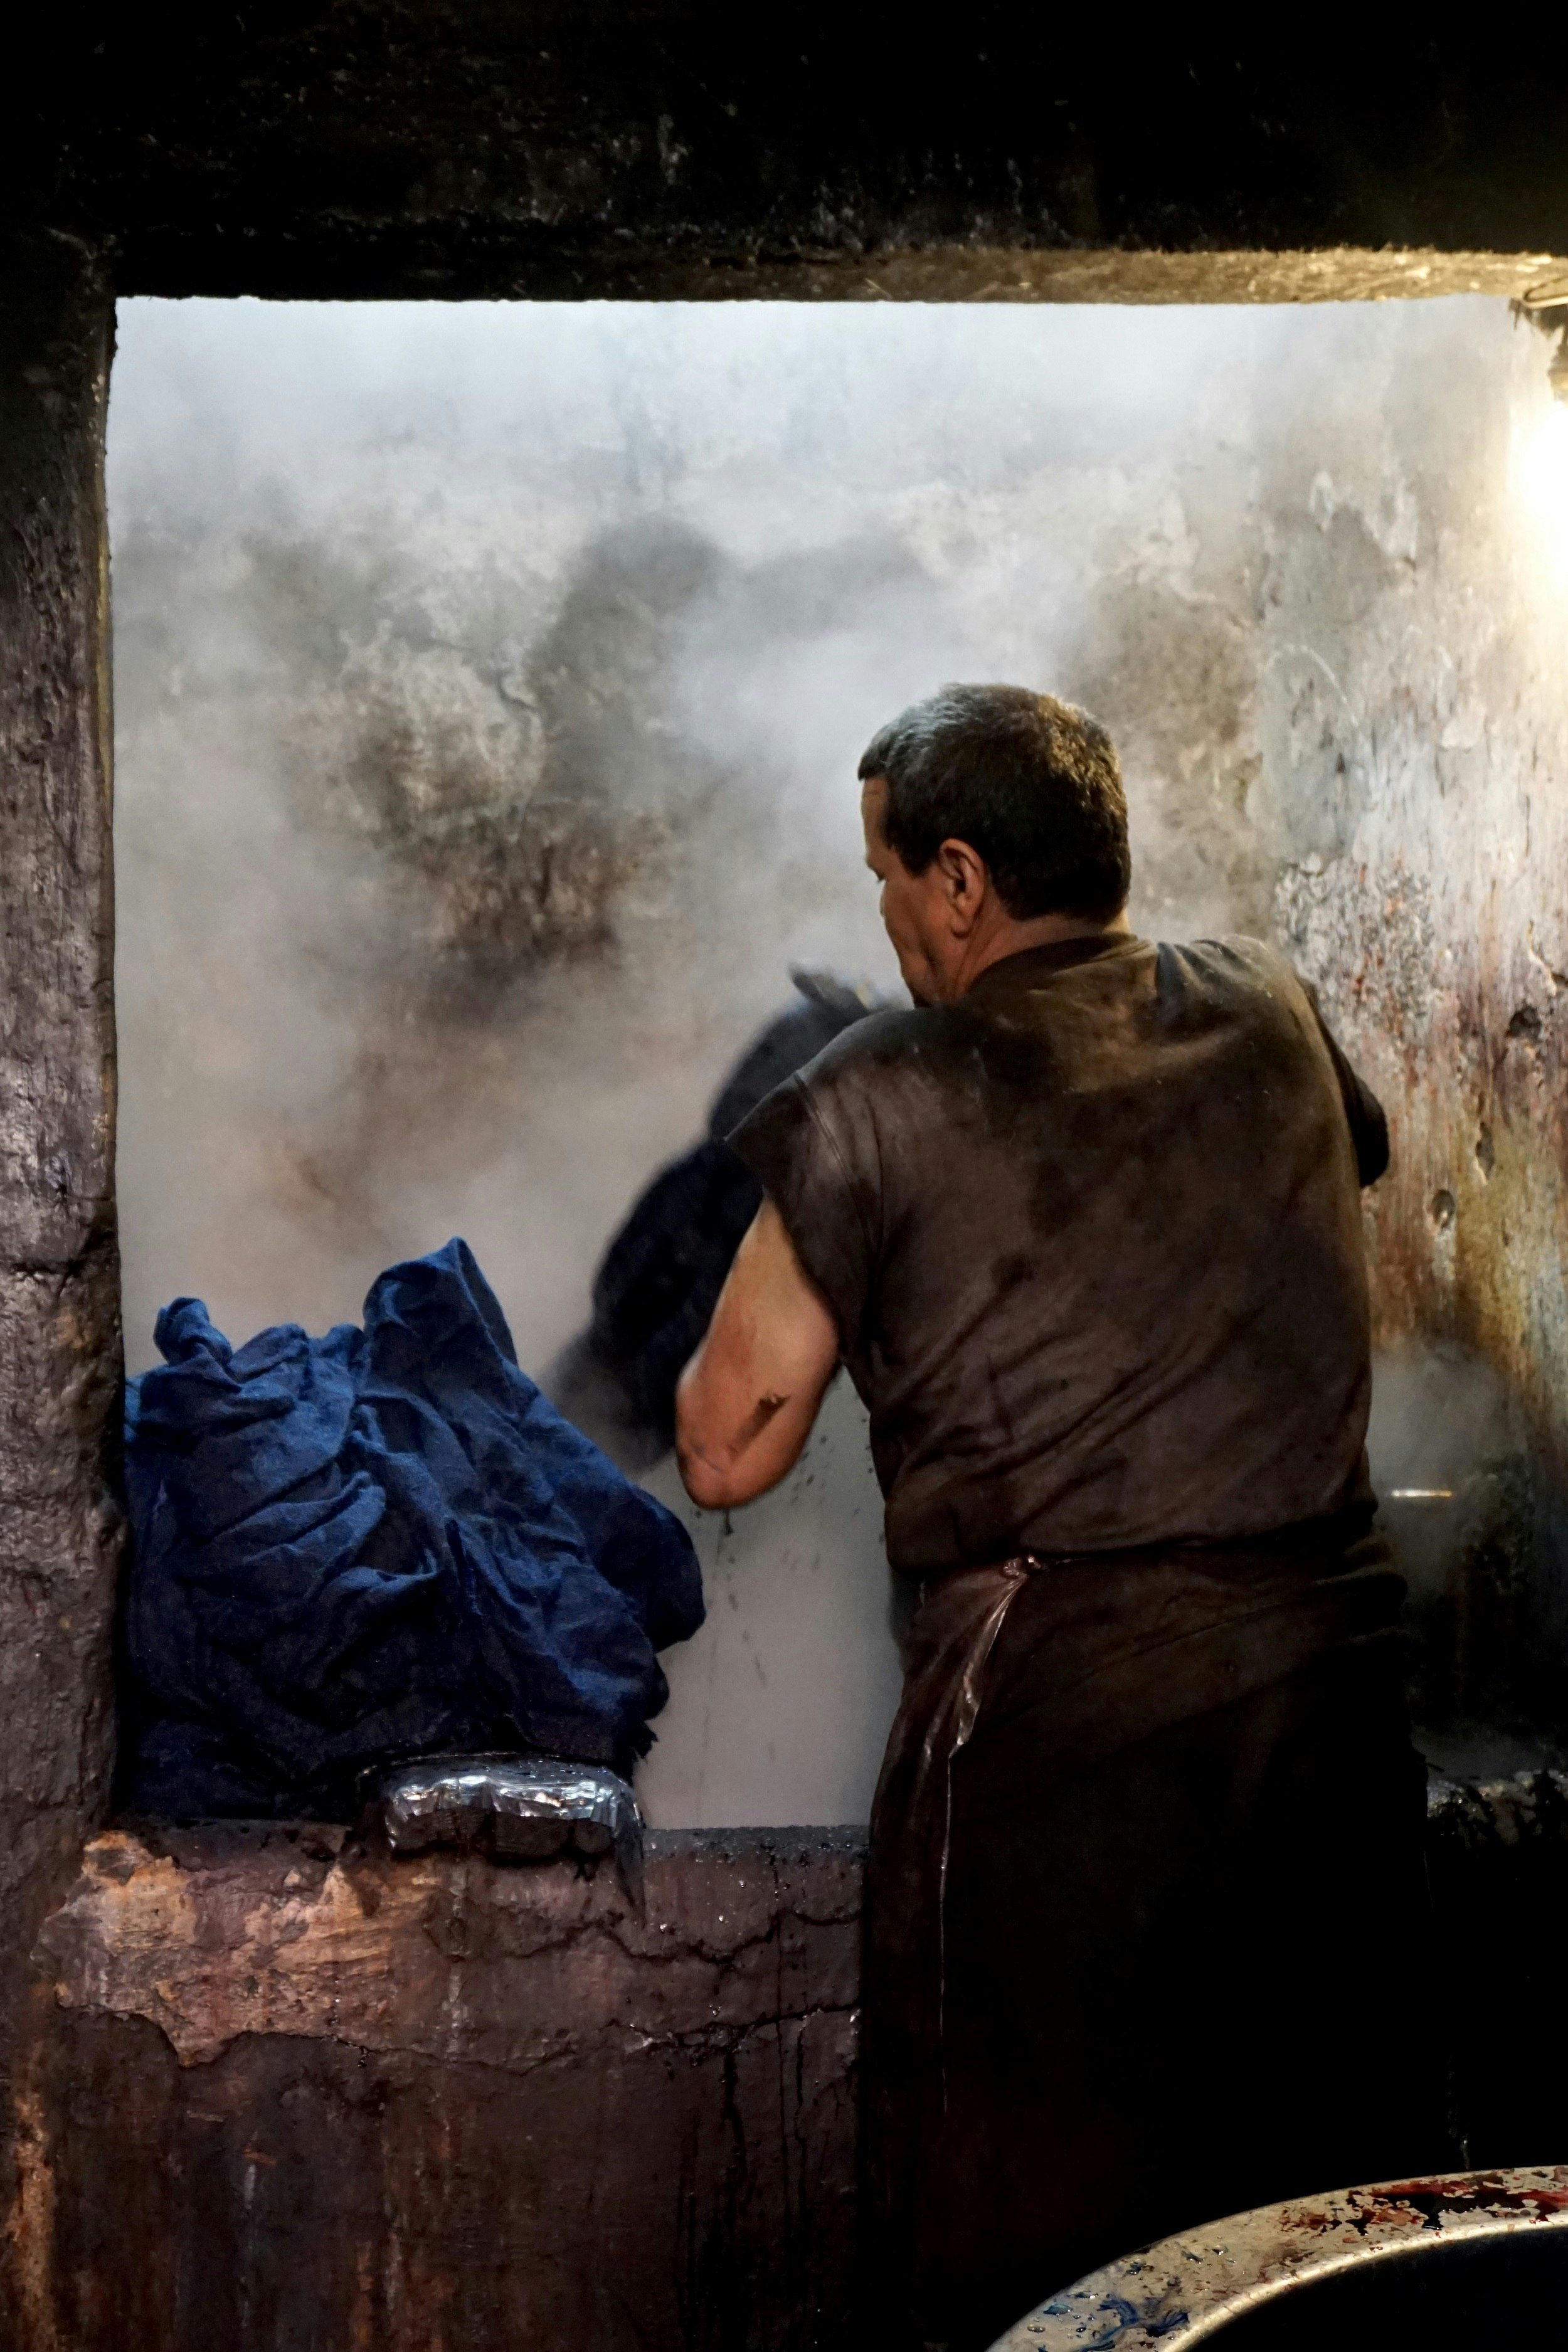 A worker, with his back to the camera, pulls wet fabrics from a steaming pit of dye.